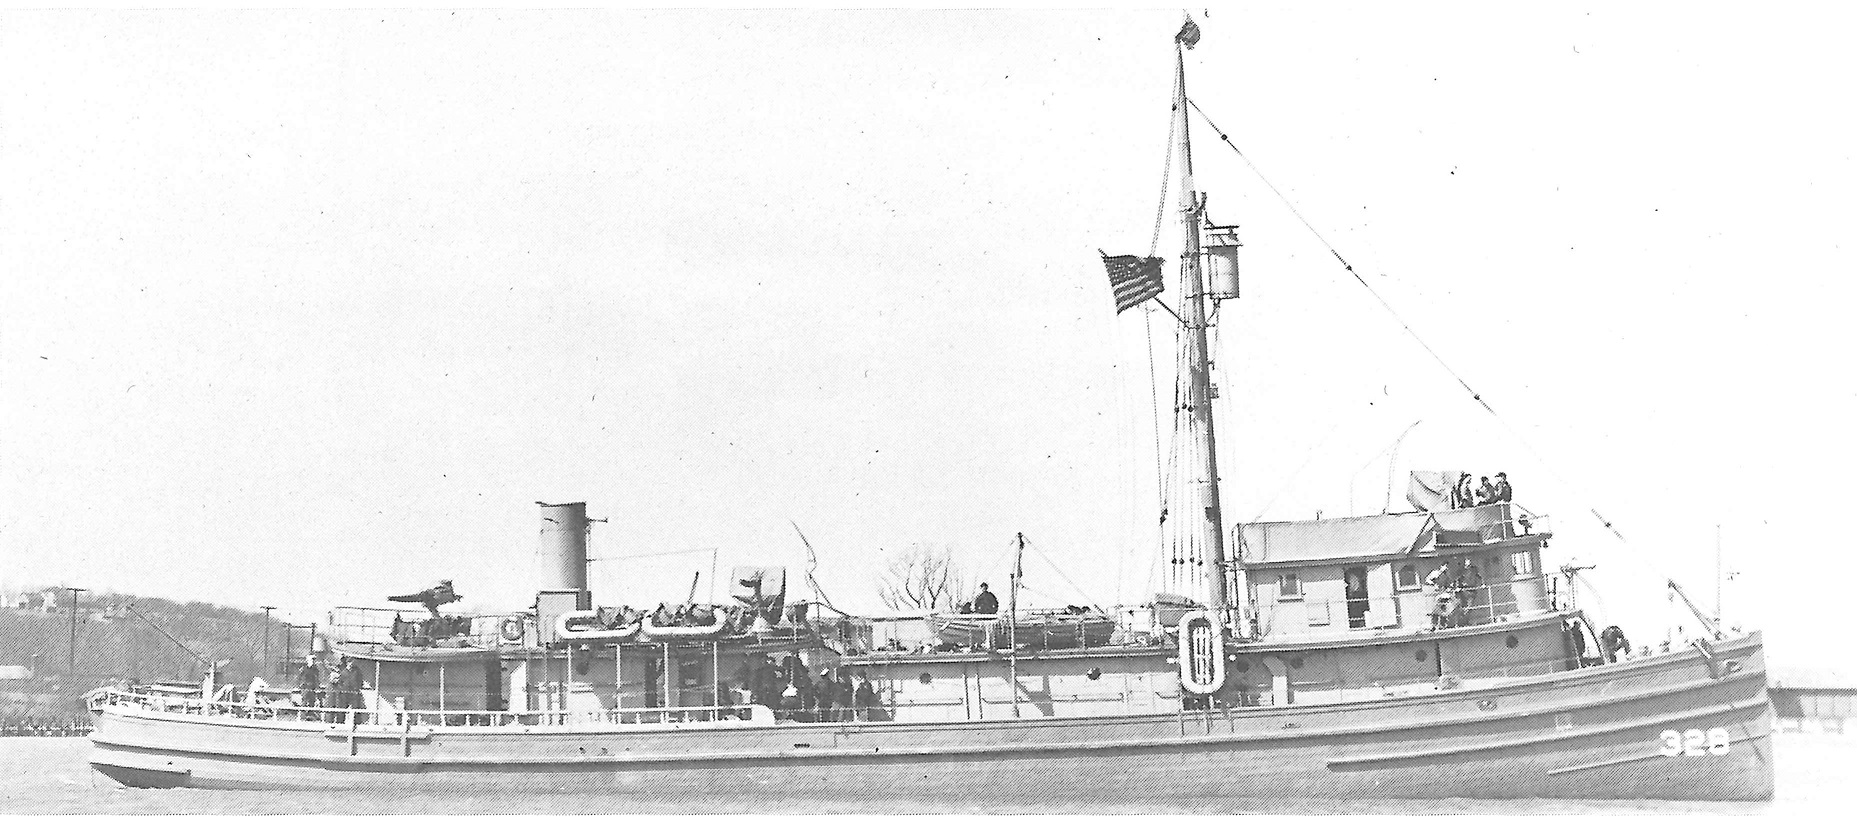 Photo of Dow’s sister cutter EM Rowe complete with mast lookout used for spotting schools of Menhaden during its former career. (U.S. Coast Guard)